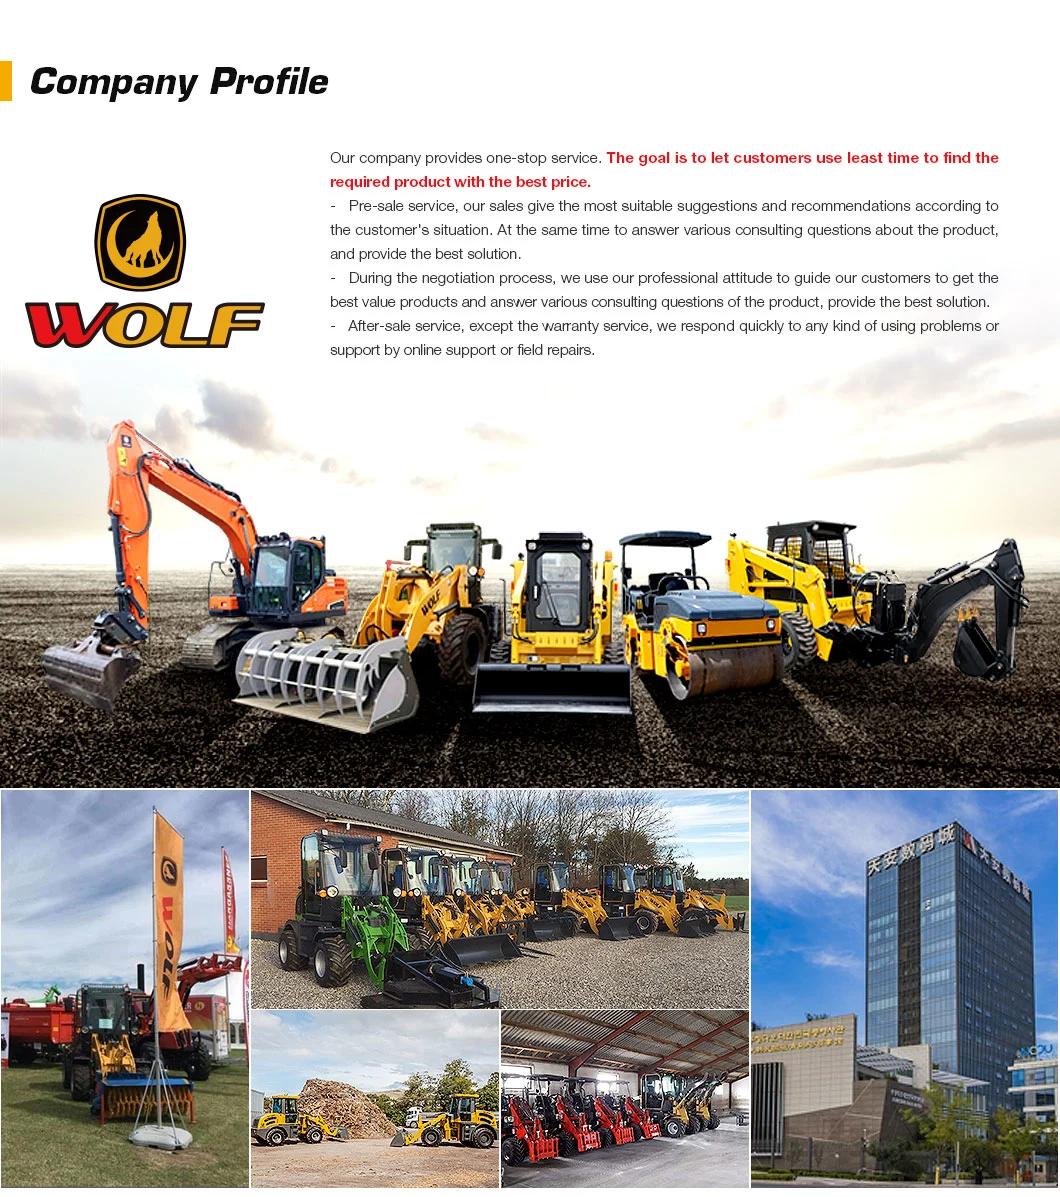 Wolf Wl825t Telescopic Loader in Europe